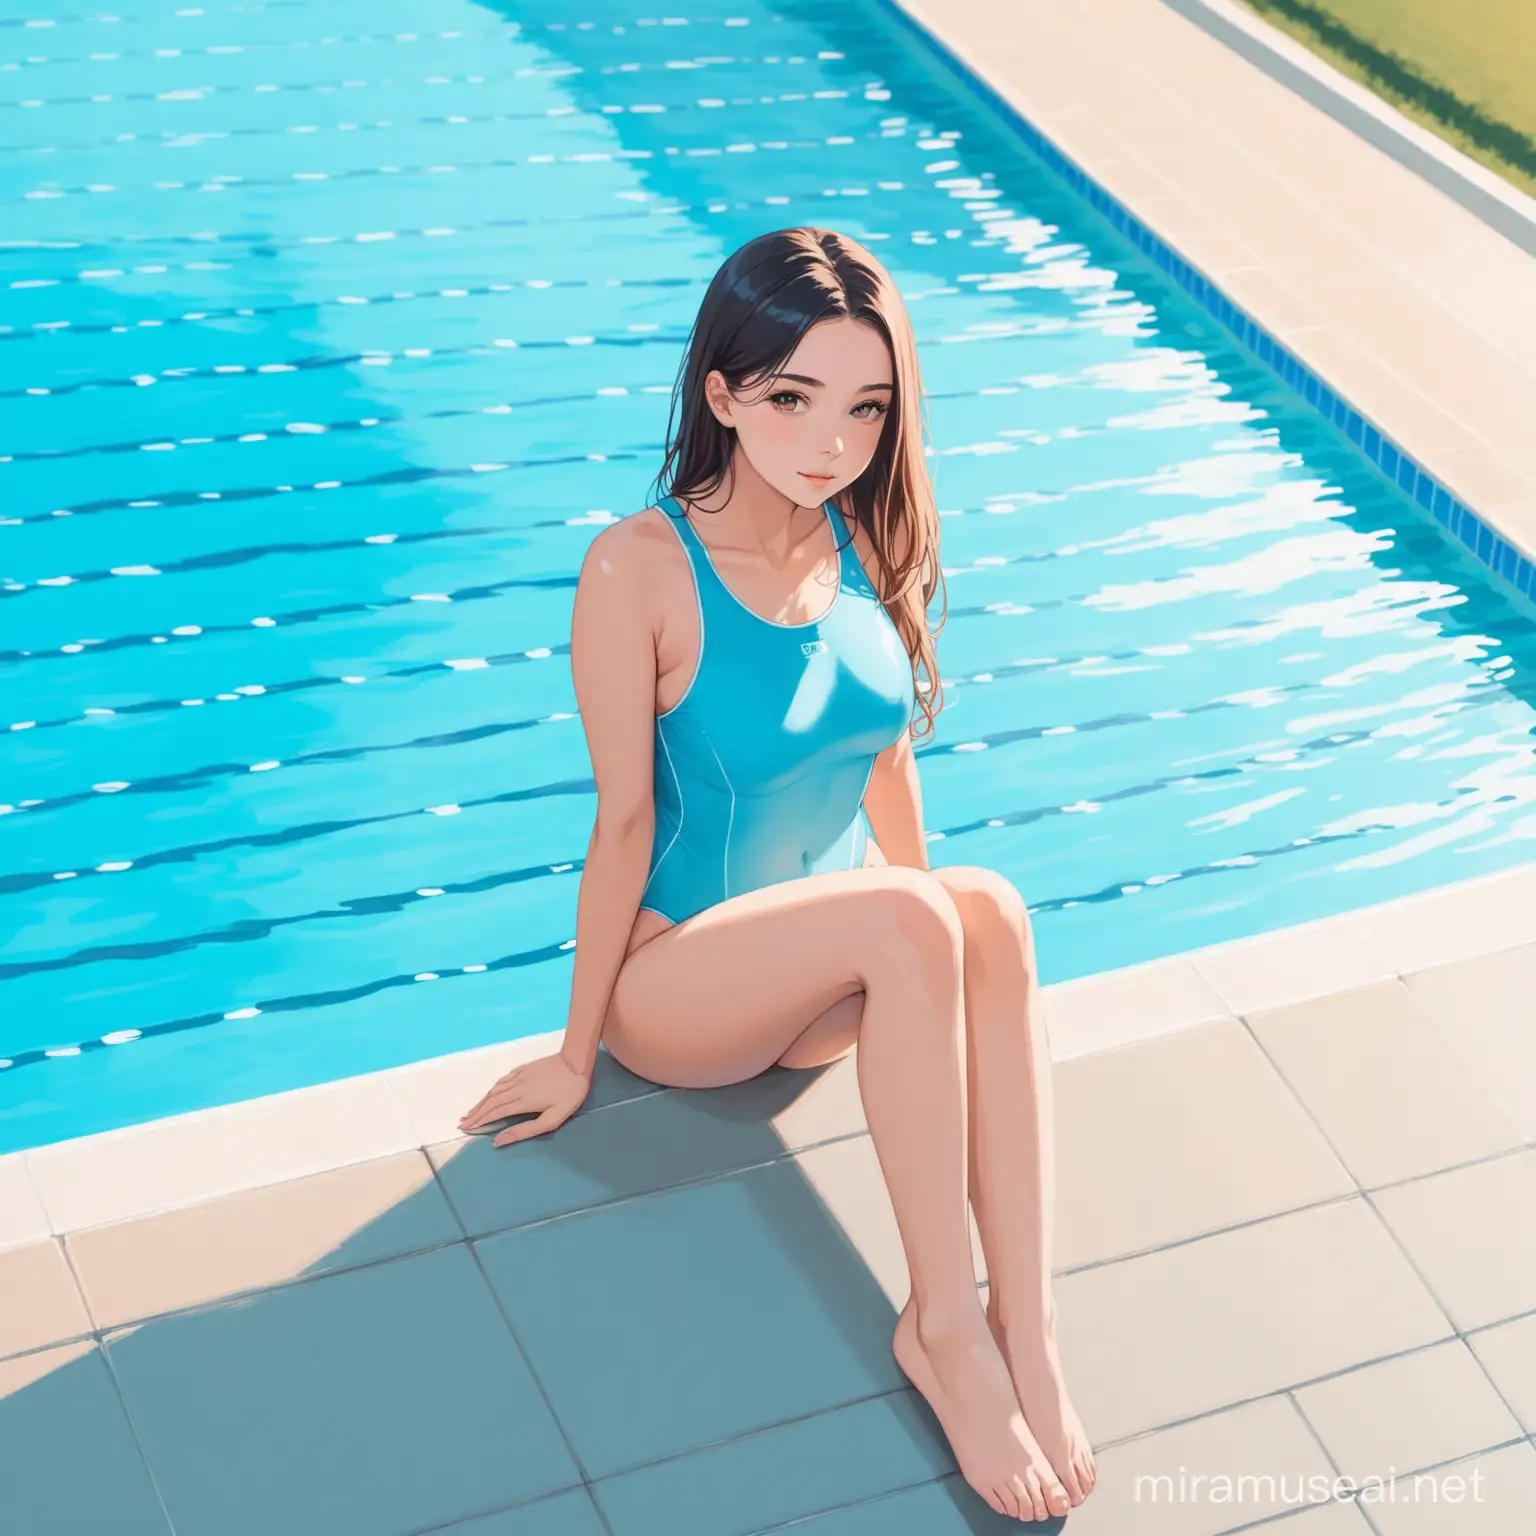 very beautiful girl in light blue swimming costume sitting on the edge of the pool, full height